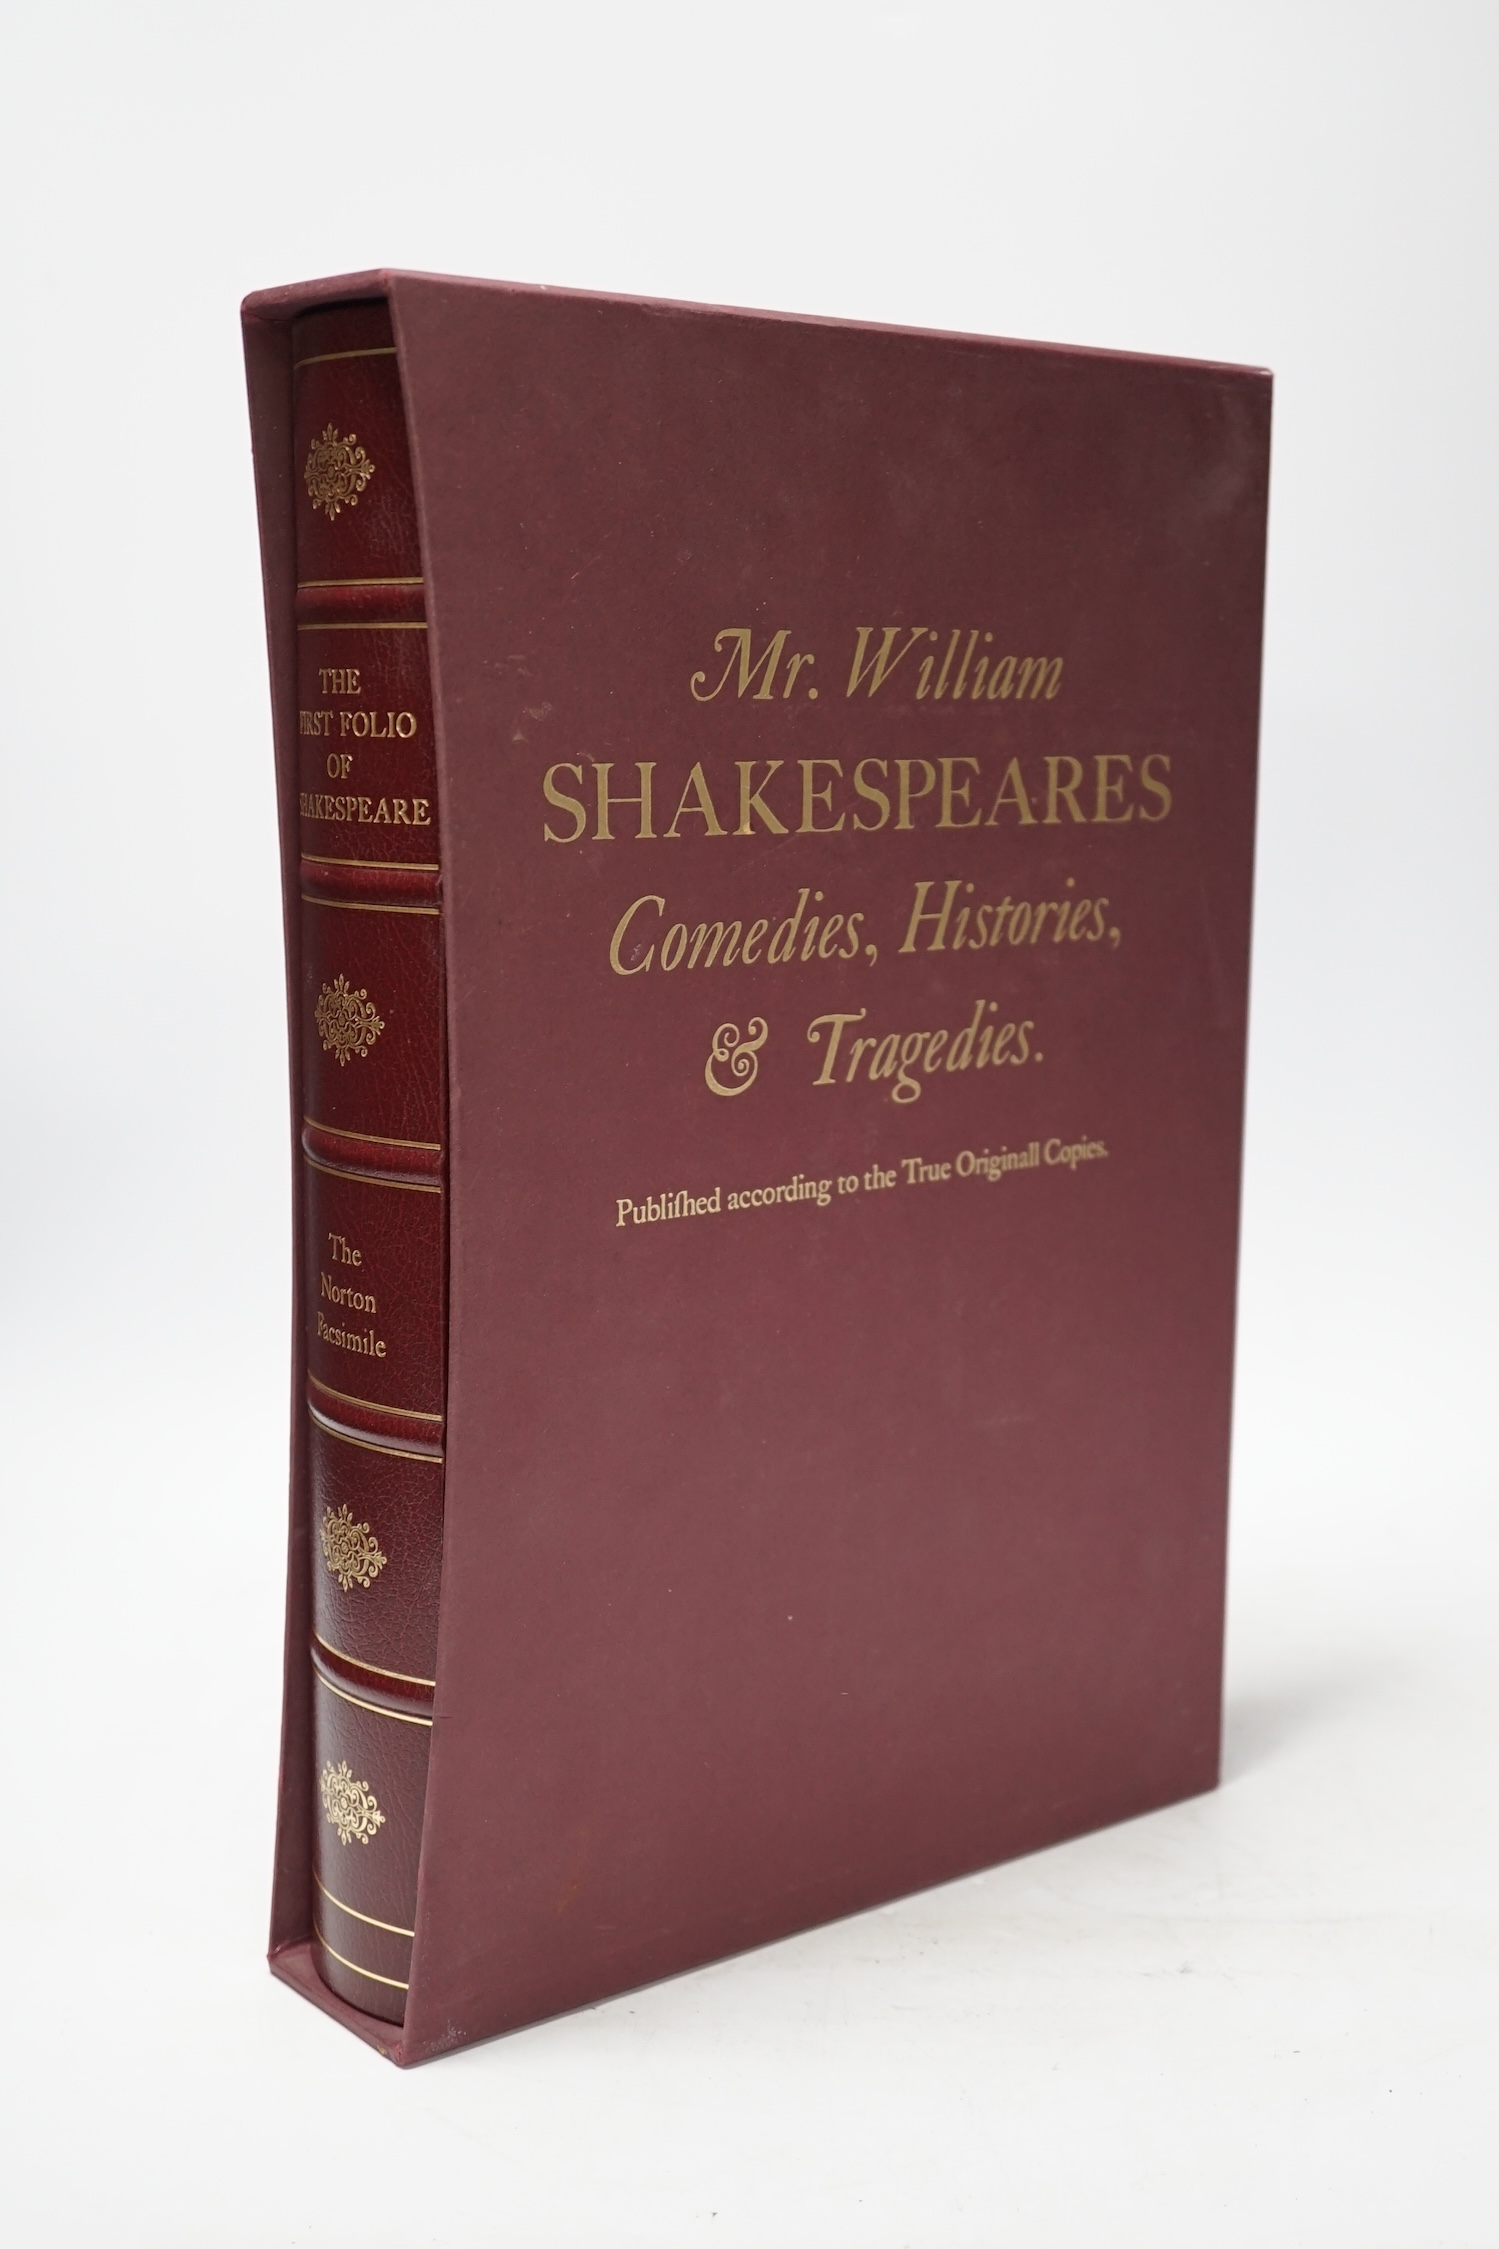 Shakespeare, William - The Norton Facsimile. The First Folio of Shakespeare: based on folios in the Folger Shakespeare Library Collection ... 2nd edition, with a new introduction by Peter W.M. Blaney; publisher's maroon